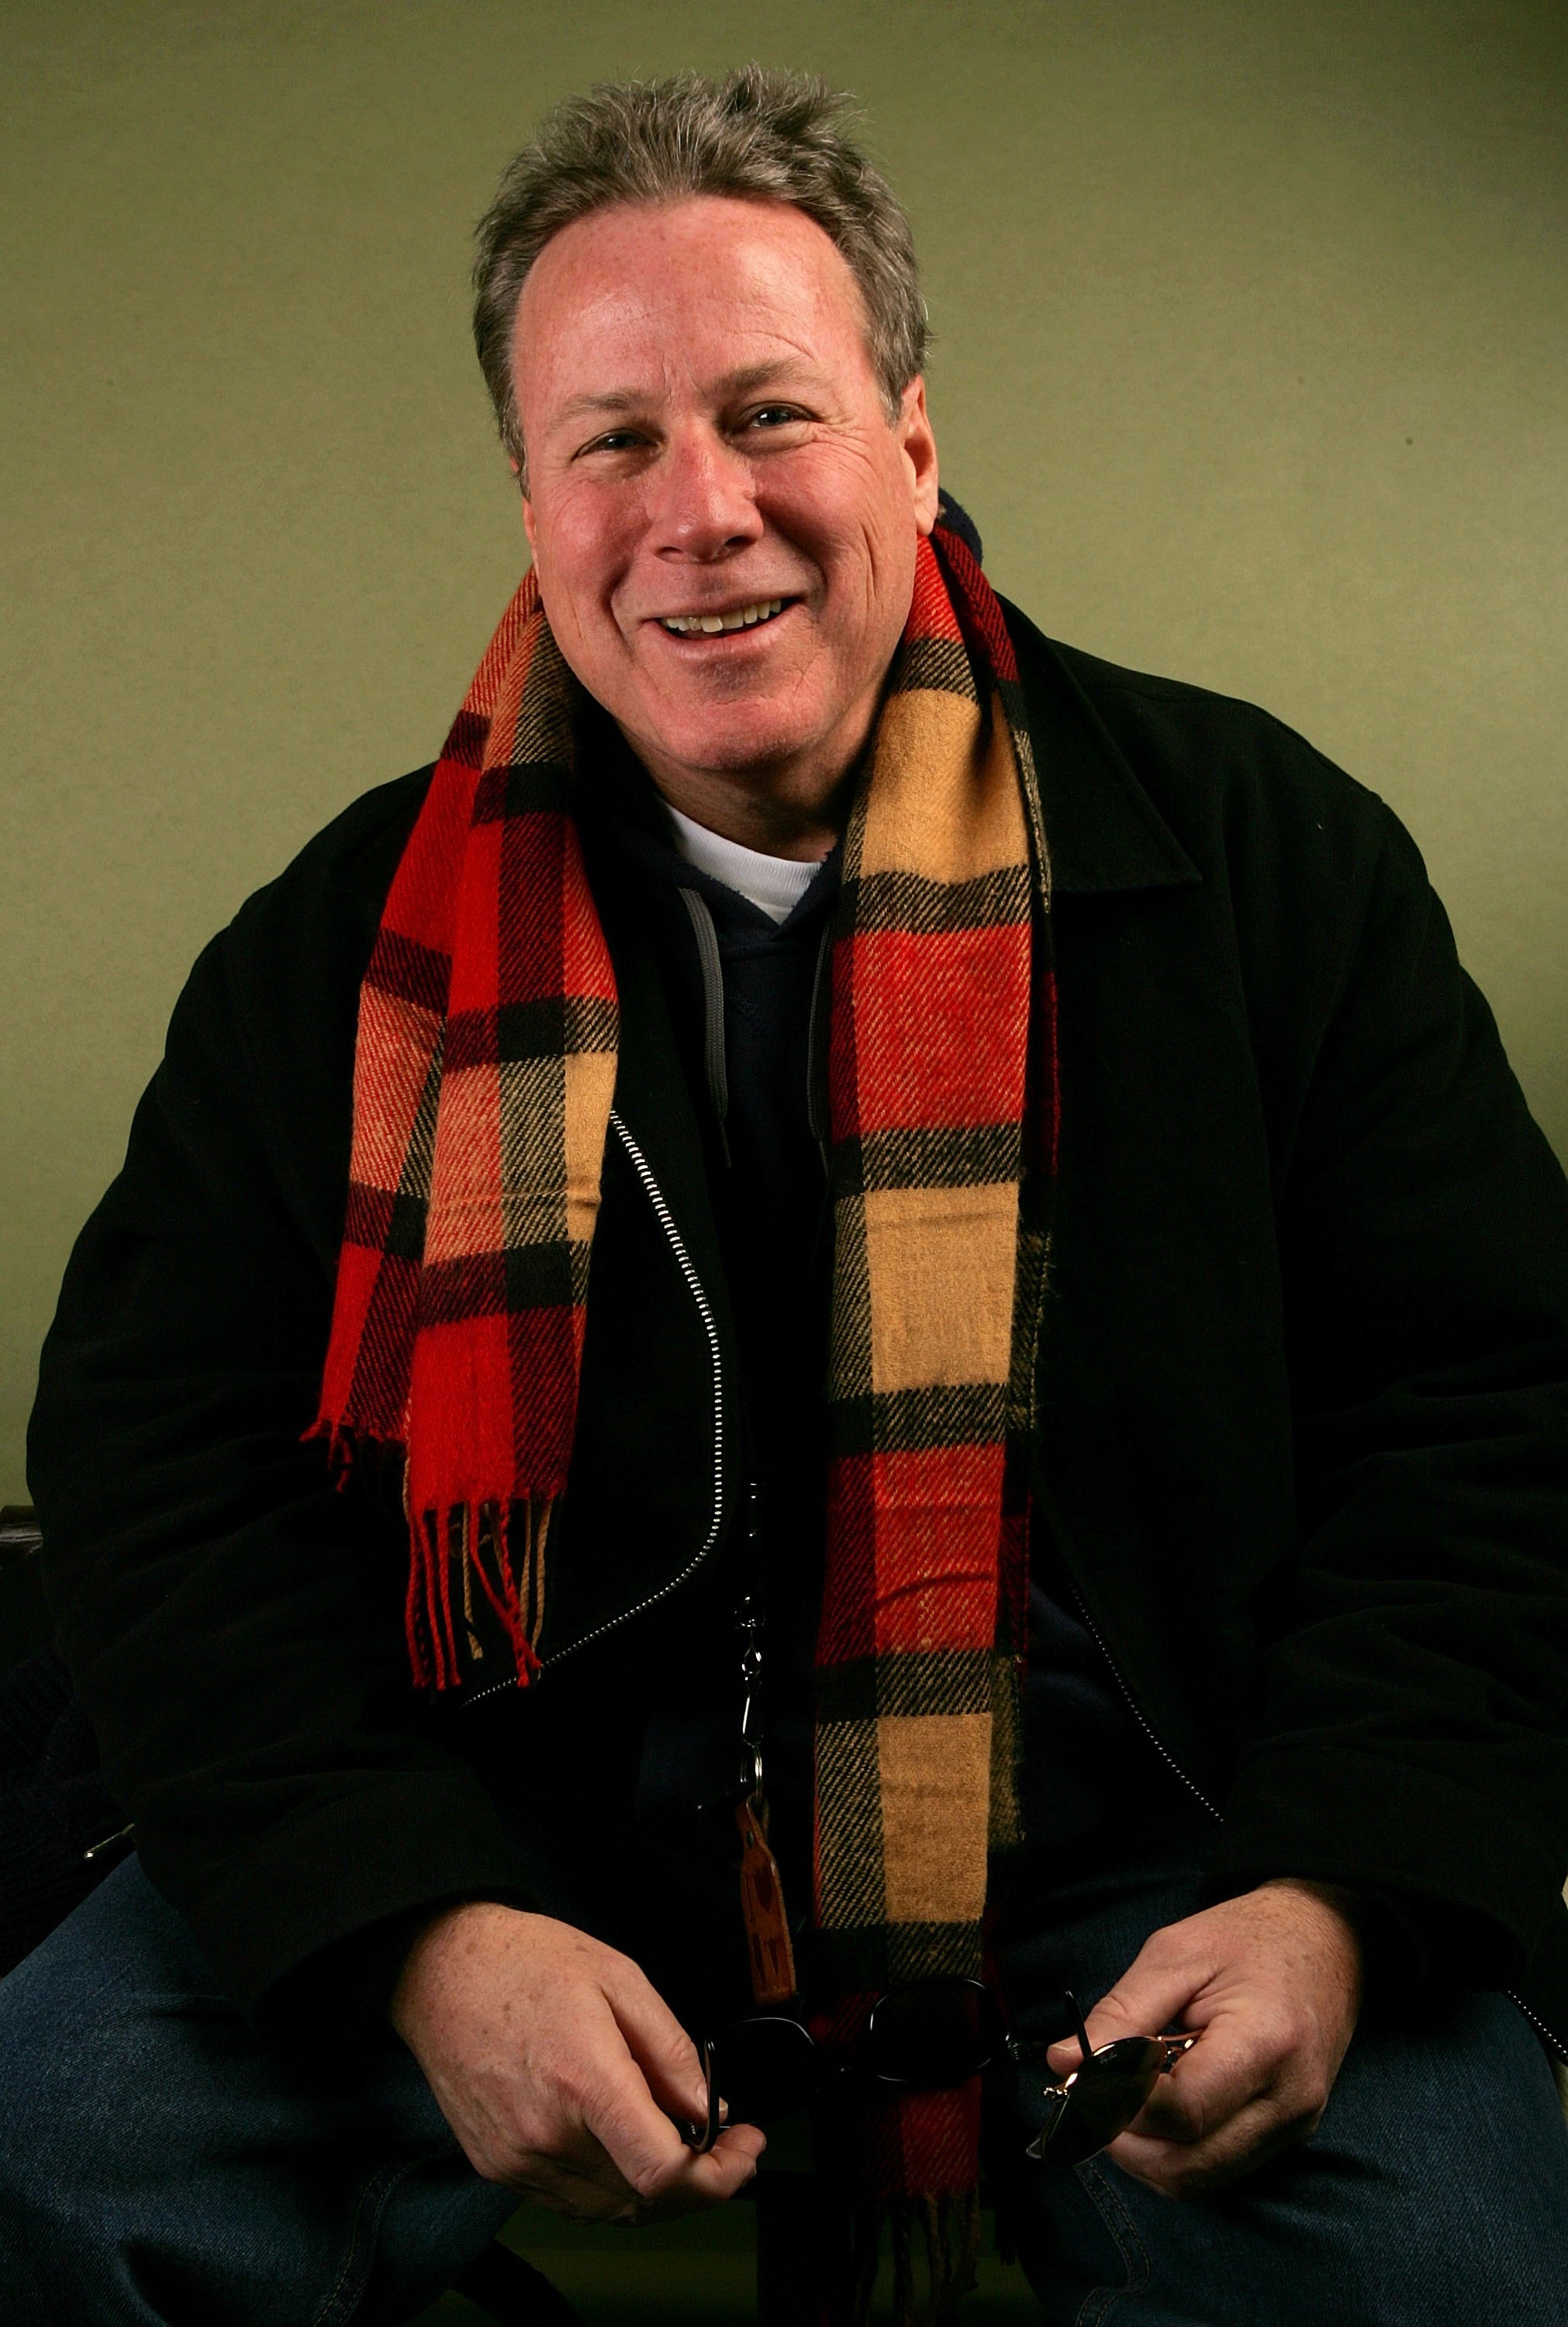 John Heard poses for a portrait at the Getty Images Portrait Studio during the 2006 Sundance Film Festival on January 20, 2006 in Park City, Utah. | Source: Getty Images